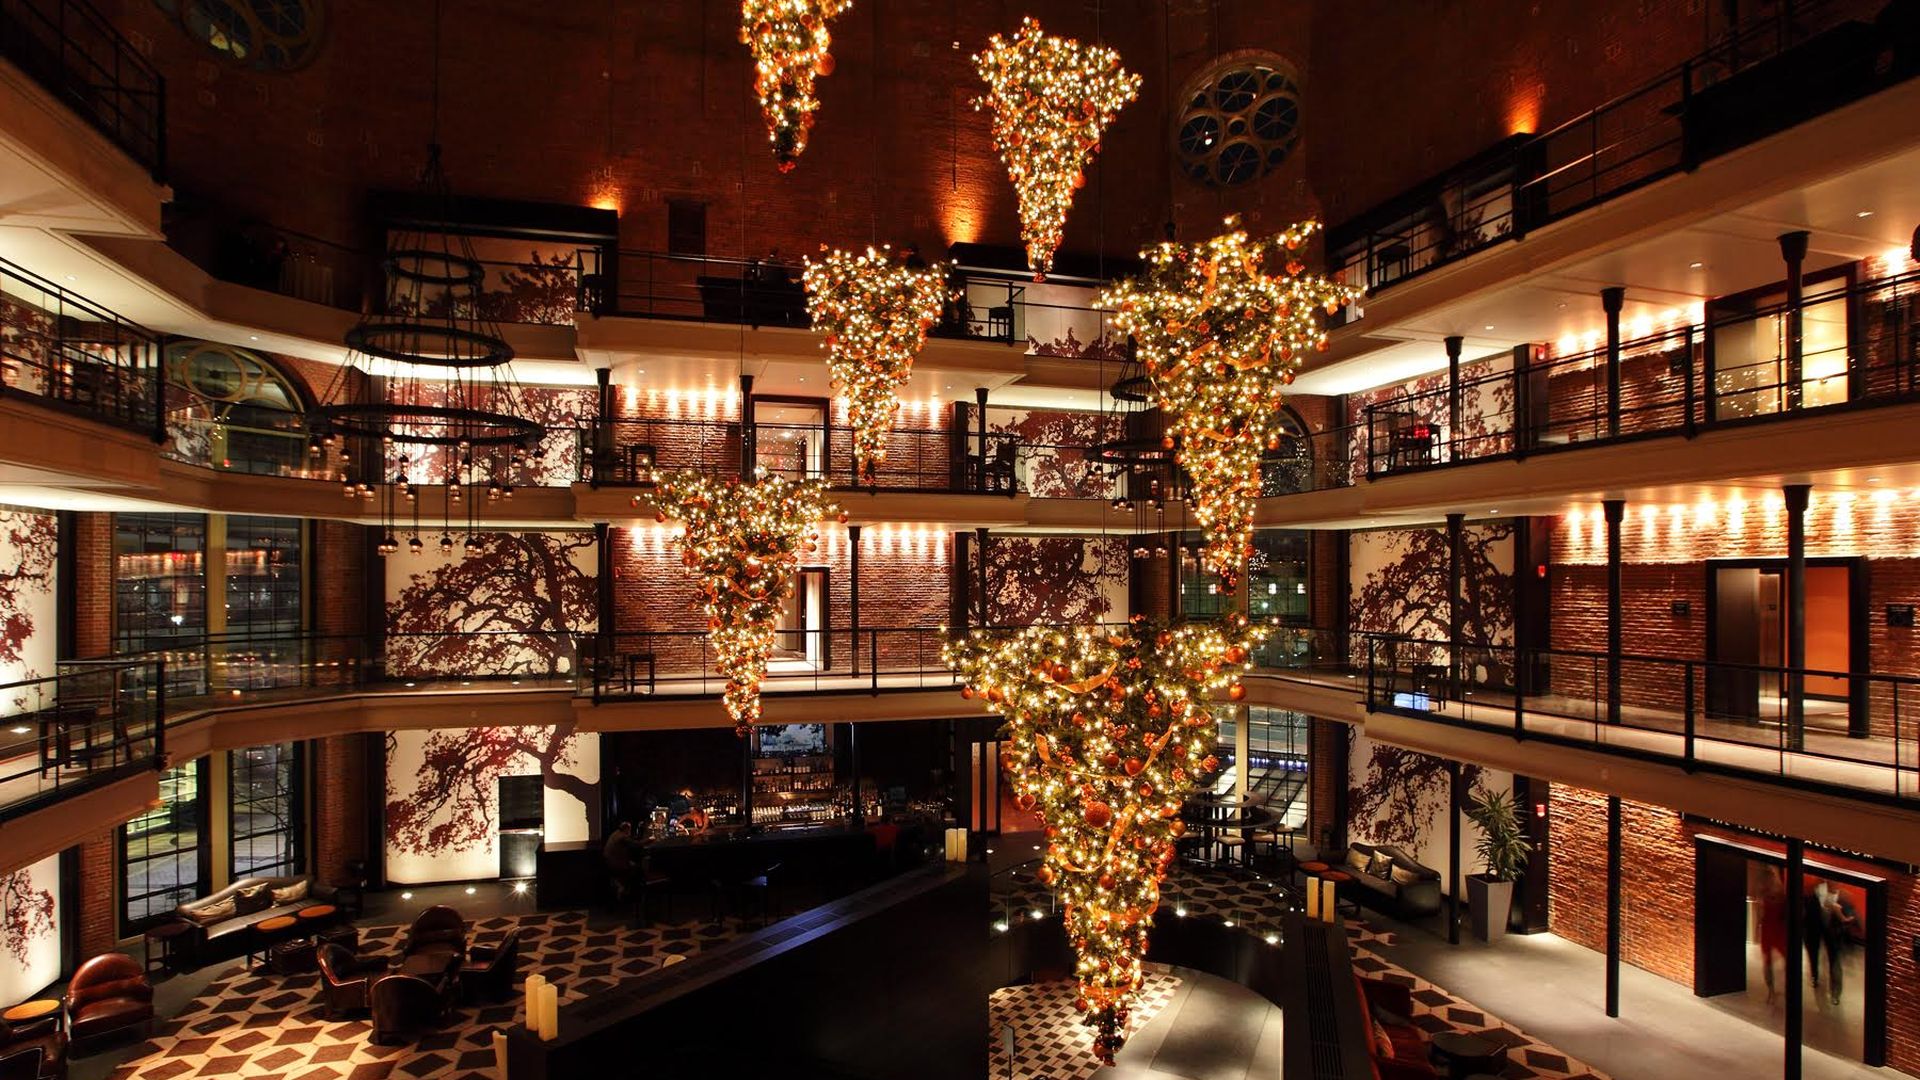 A three-story hotel lobby at the Liberty Hotel in Boston with upside down Christmas trees hanging from the ceiling.